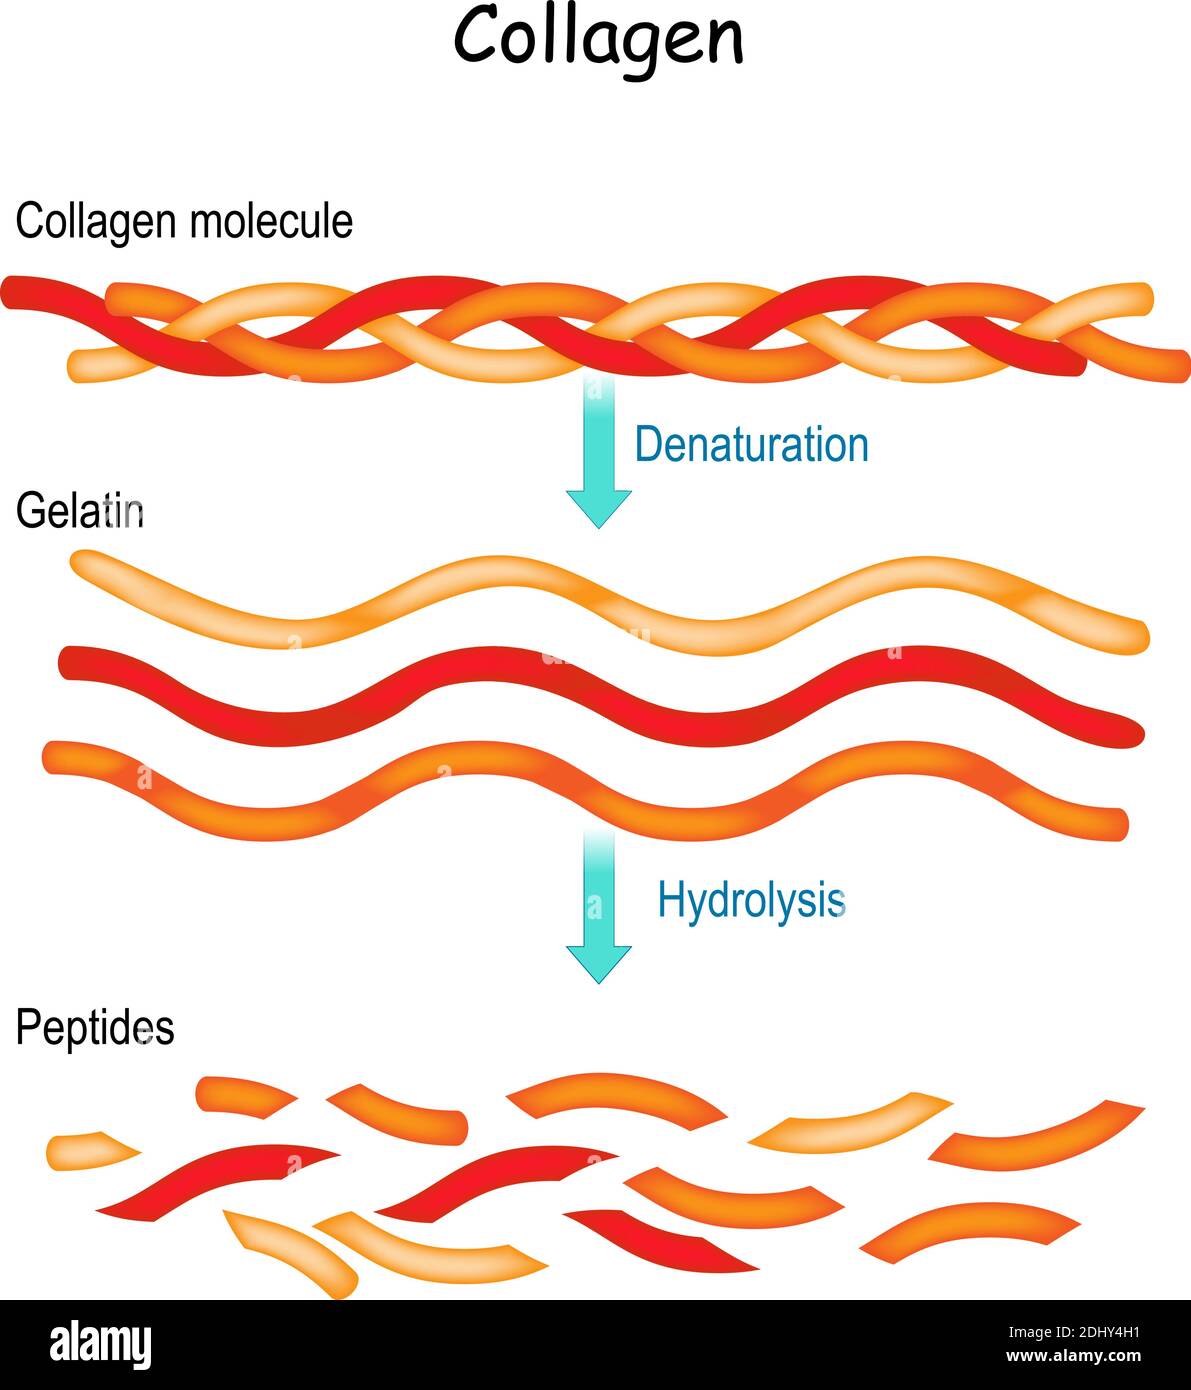 Collagen Hydrolysis and Denaturation. from Collagen molecule to Gelatin and peptides. Stock Vector